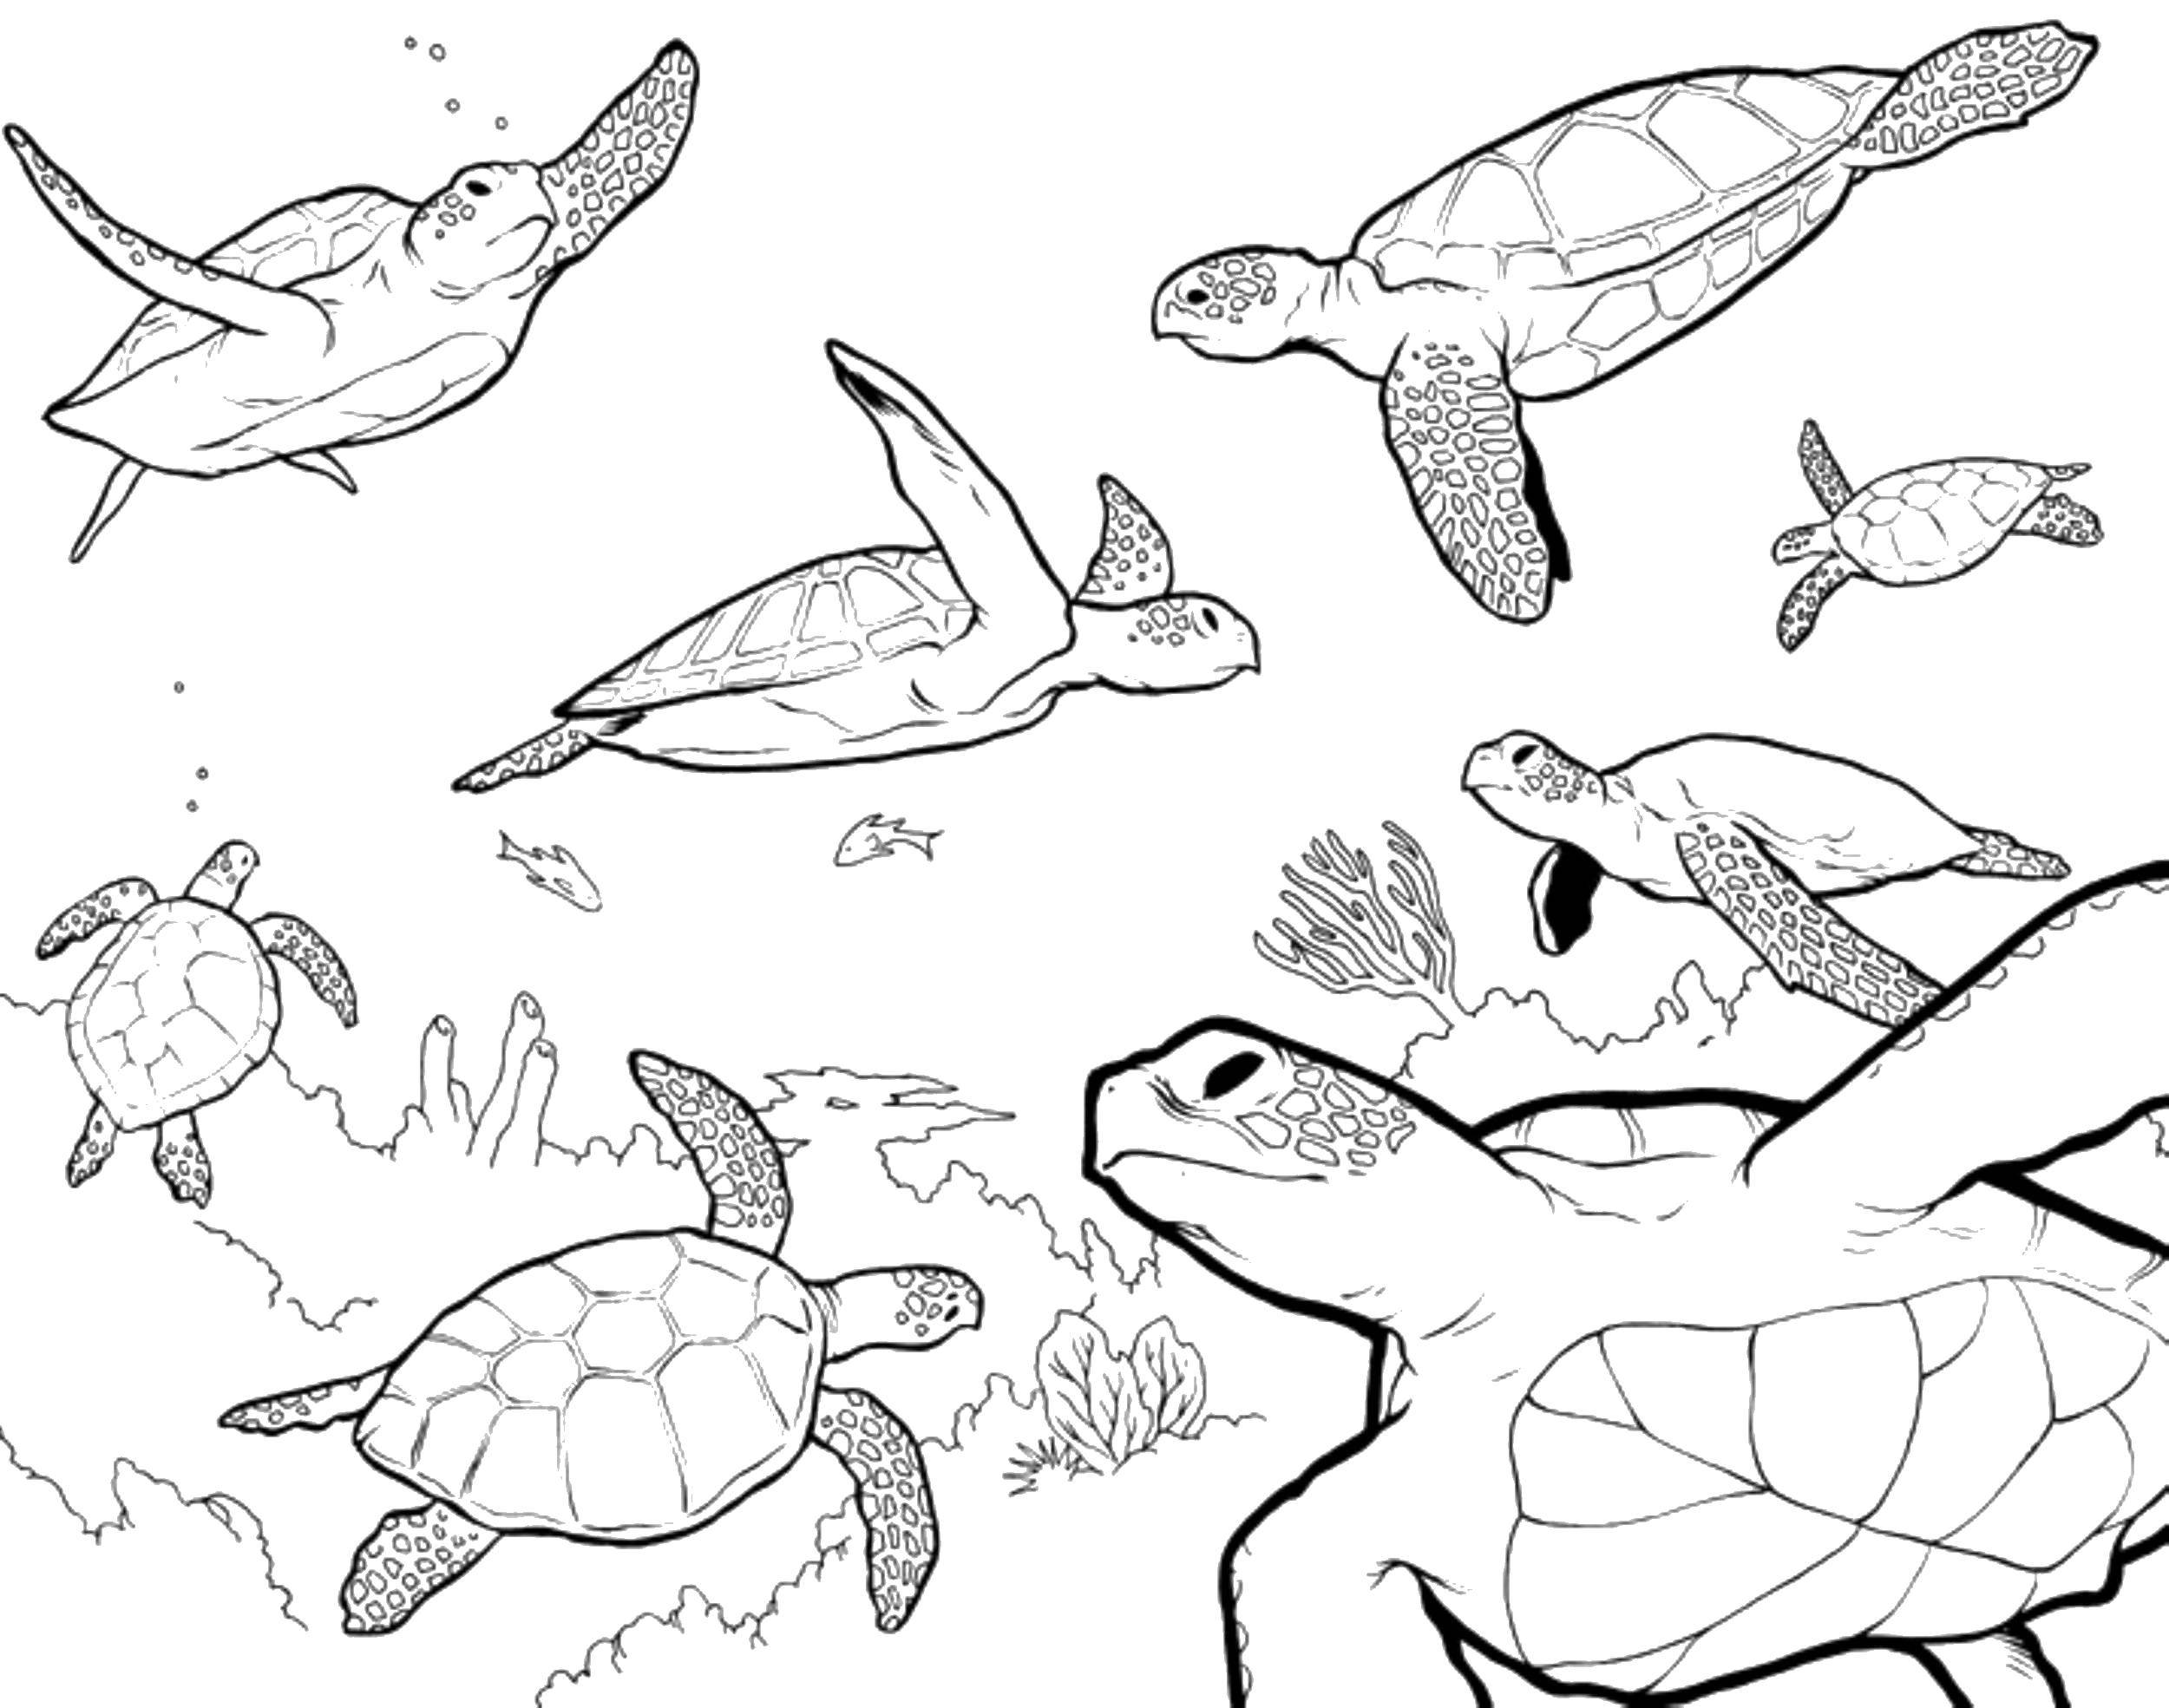 Coloring Lots of sea turtles. Category marine. Tags:  Underwater world, turtle.